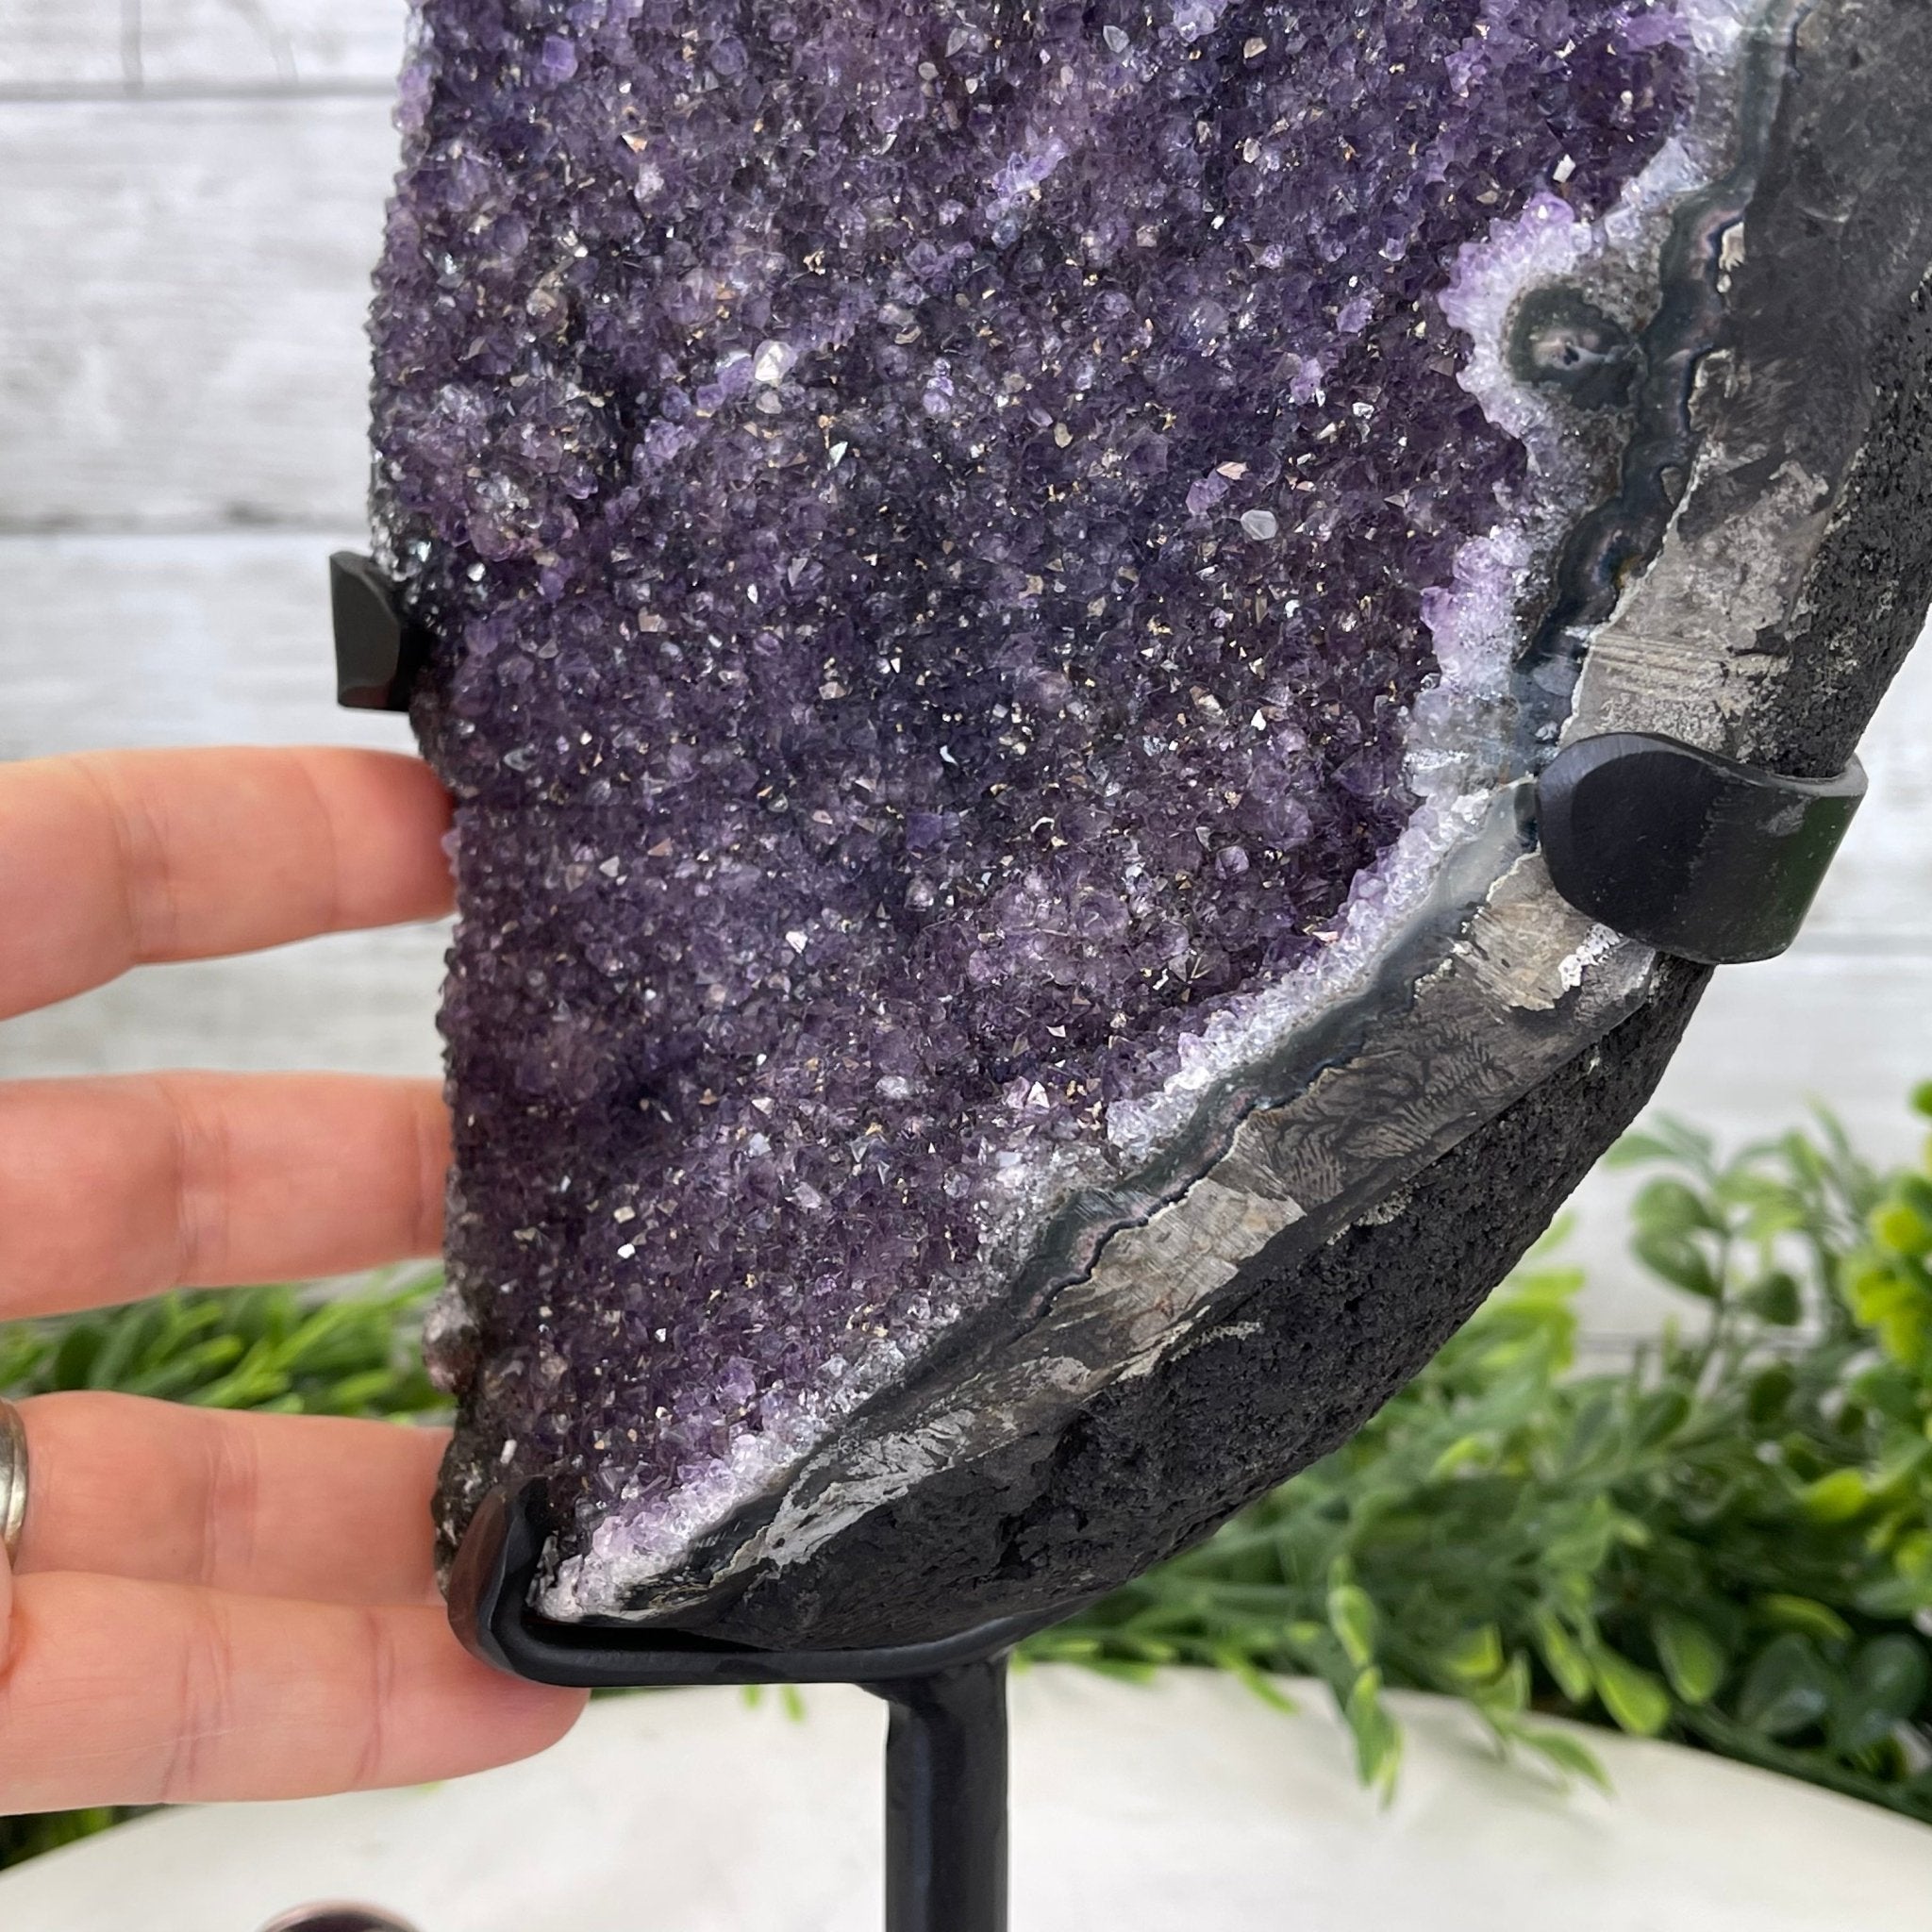 Extra Plus Quality Amethyst Druse Cluster on Metal Stand, 12.5 lbs & 14" tall #5491-0046 by Brazil Gems - Brazil GemsBrazil GemsExtra Plus Quality Amethyst Druse Cluster on Metal Stand, 12.5 lbs & 14" tall #5491-0046 by Brazil GemsClusters on Fixed Bases5491-0046